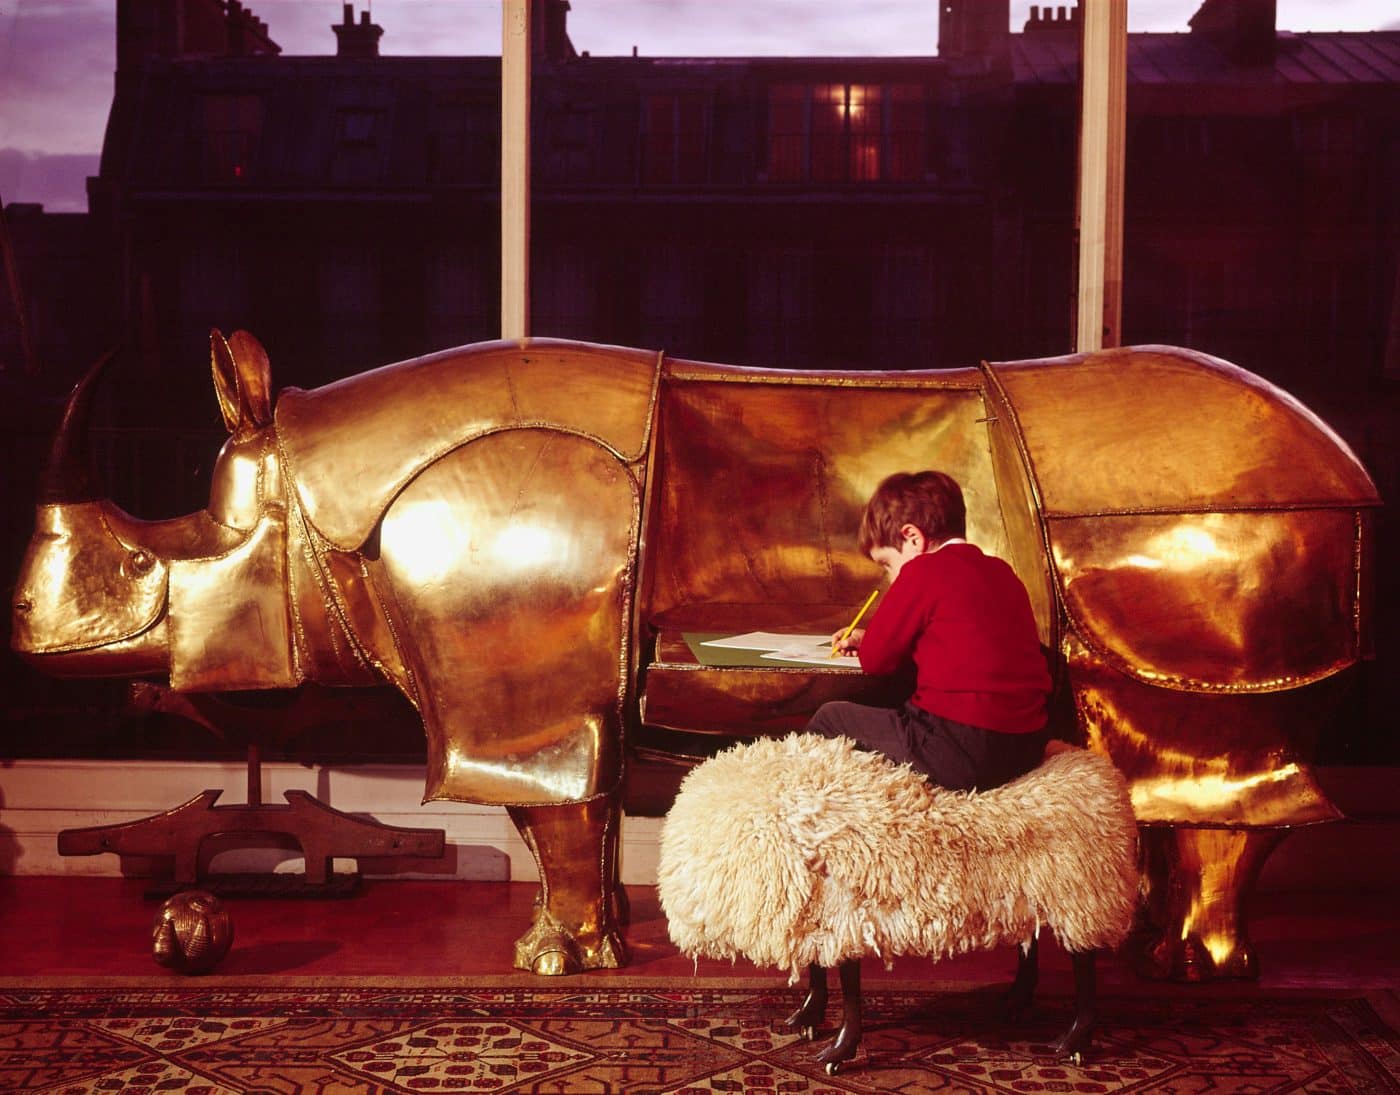 Golden rhinocerus statue sculpture with drop-down fold-out desk created by French artist and designer François-Xavier Lalanne. Head is a coin bank. Sheep stool Assouline book Lalanne: A World of Poetry